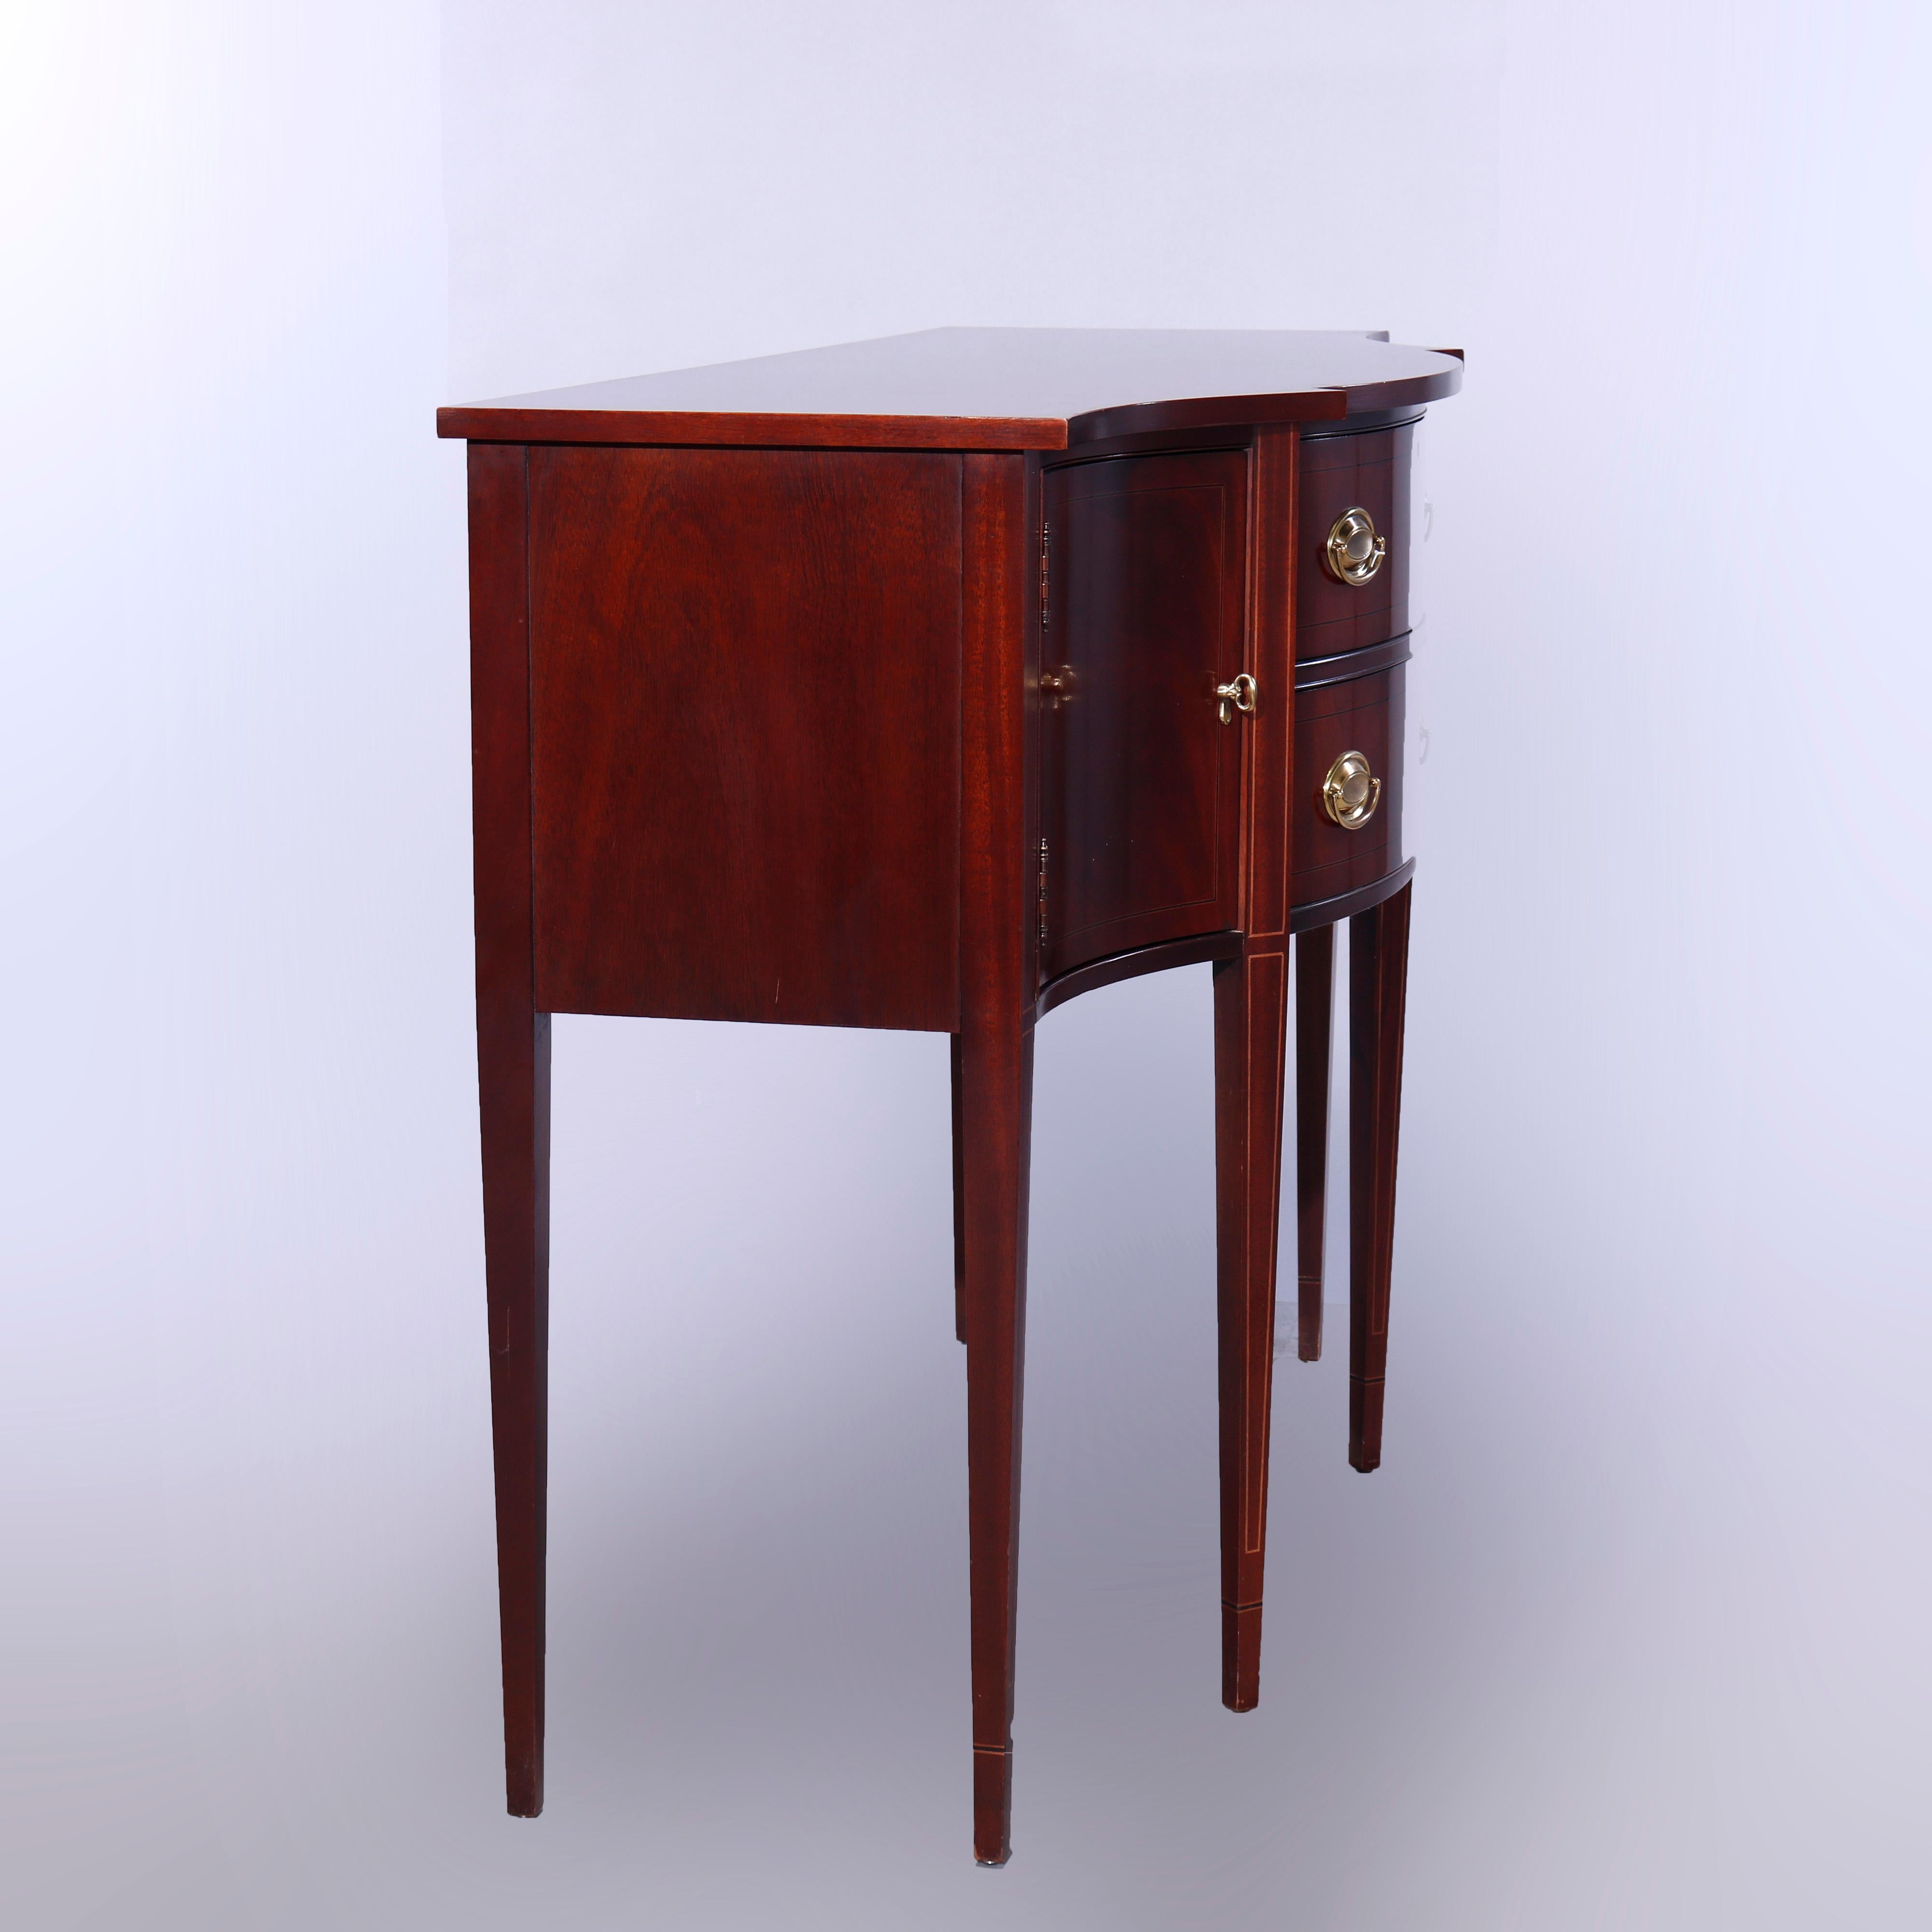 Hepplewhite Style Hickory Chair Inlaid Mahogany Silver Server Sideboard 20th C 2